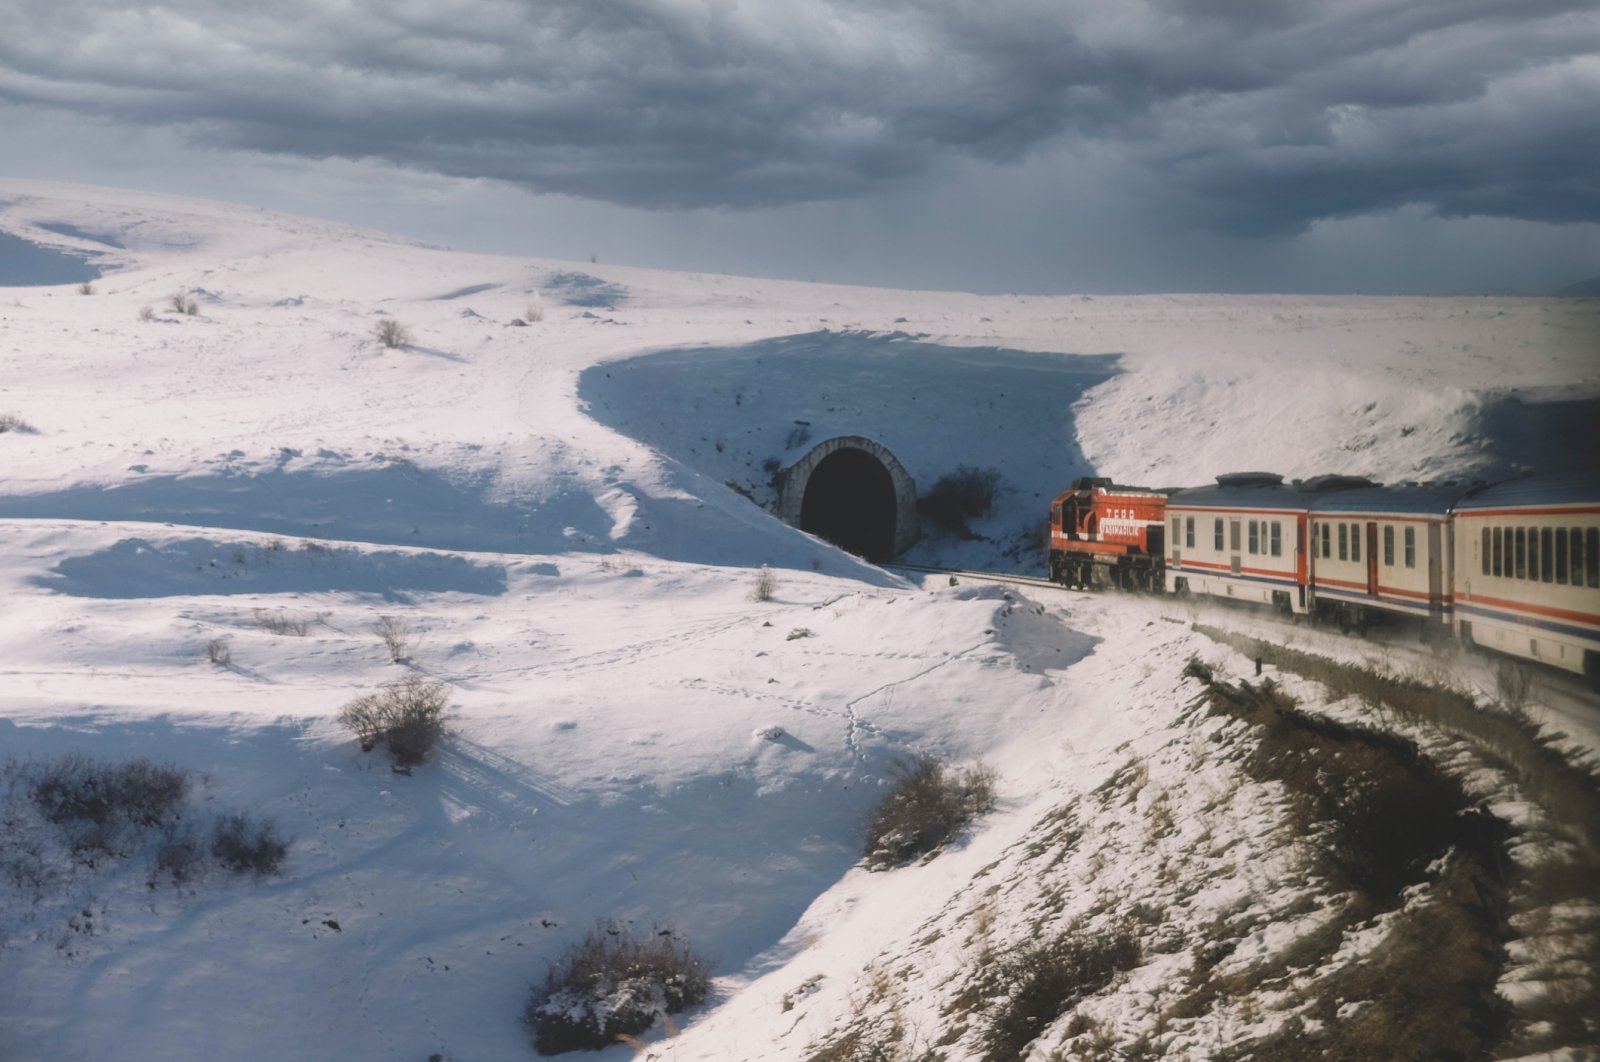 A scenic view of snow-covered mountains against the sky and Eastern Express train, Kars, Türkiye. (Getty Images Photo)